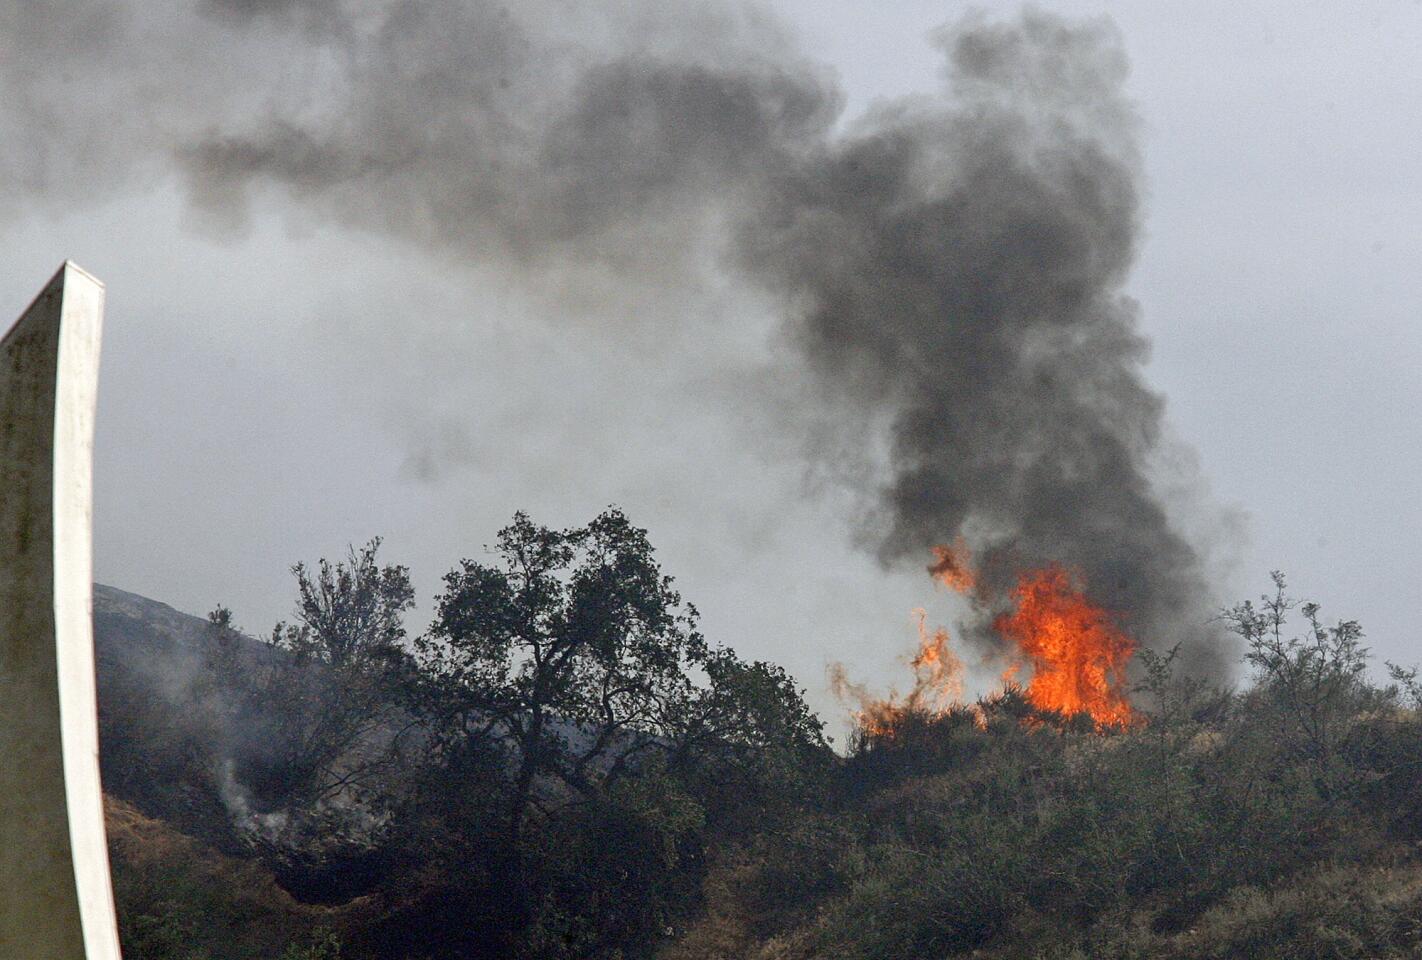 Photo Gallery: Glenoaks and Chevy Chase canyons burn in brush fire